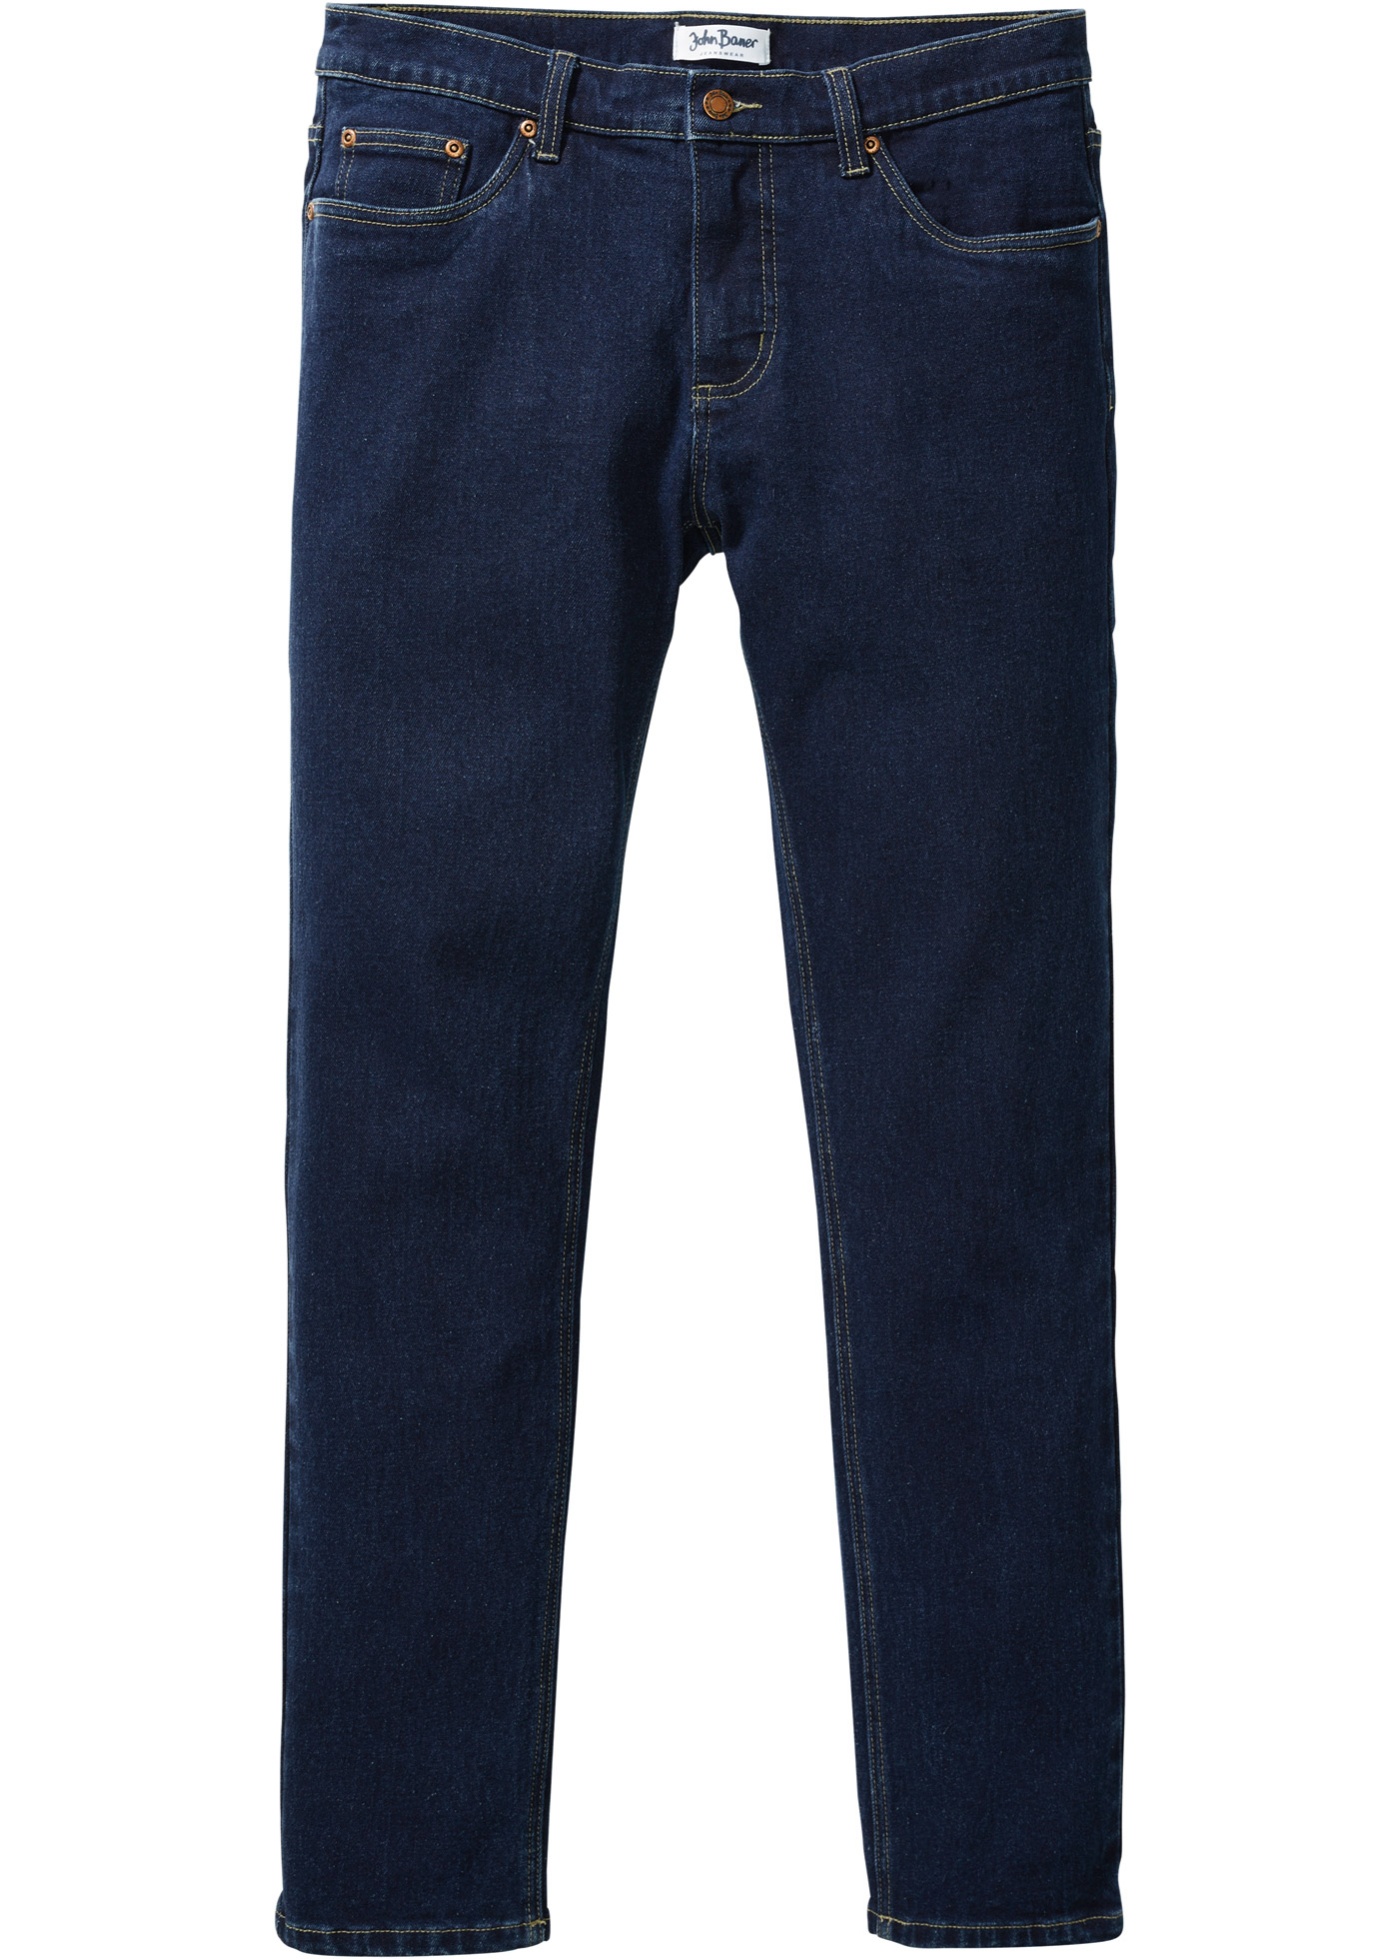 jean extensible slim fit, straight